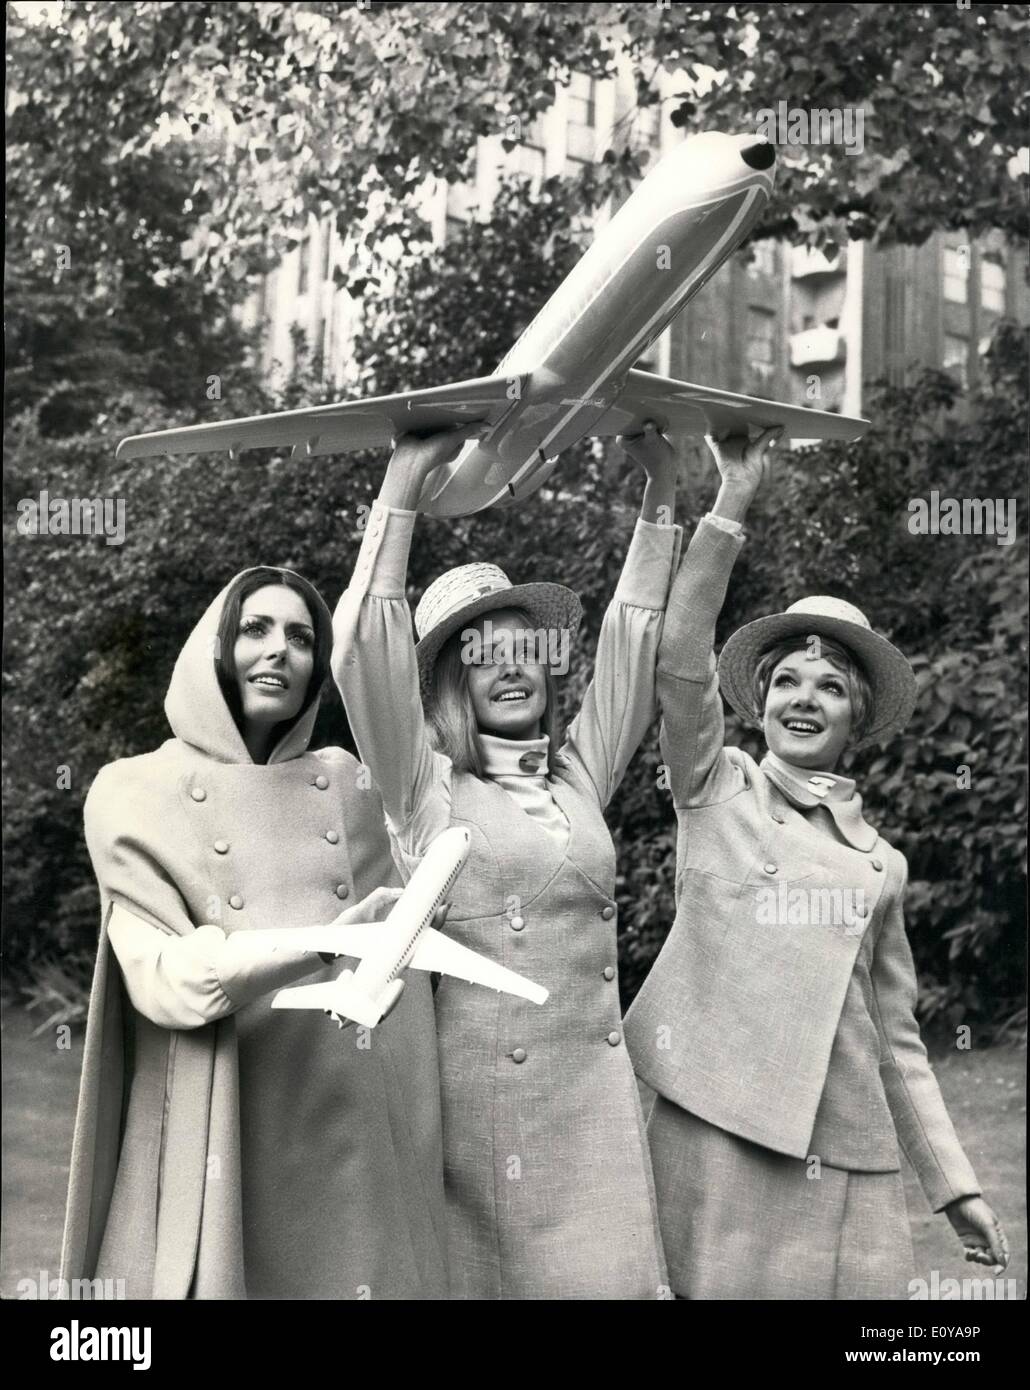 Sep. 09, 1969 - A new Airline designed entirely for Holidaymakers.: Pink, turquoise and orange airliners, will be flying in Britain's skies next year by a British independent airline. And the hostesses will wear straw boaters and uniforms in colours to match their aircraft. This new look in the skies was revealed today at a press conference by Court Line Ltd, who are the shipping firm who own Autair International. This new airline will be the first to be designed entirely for holidaymakers and will concentrate solely on holiday charter flights Stock Photo